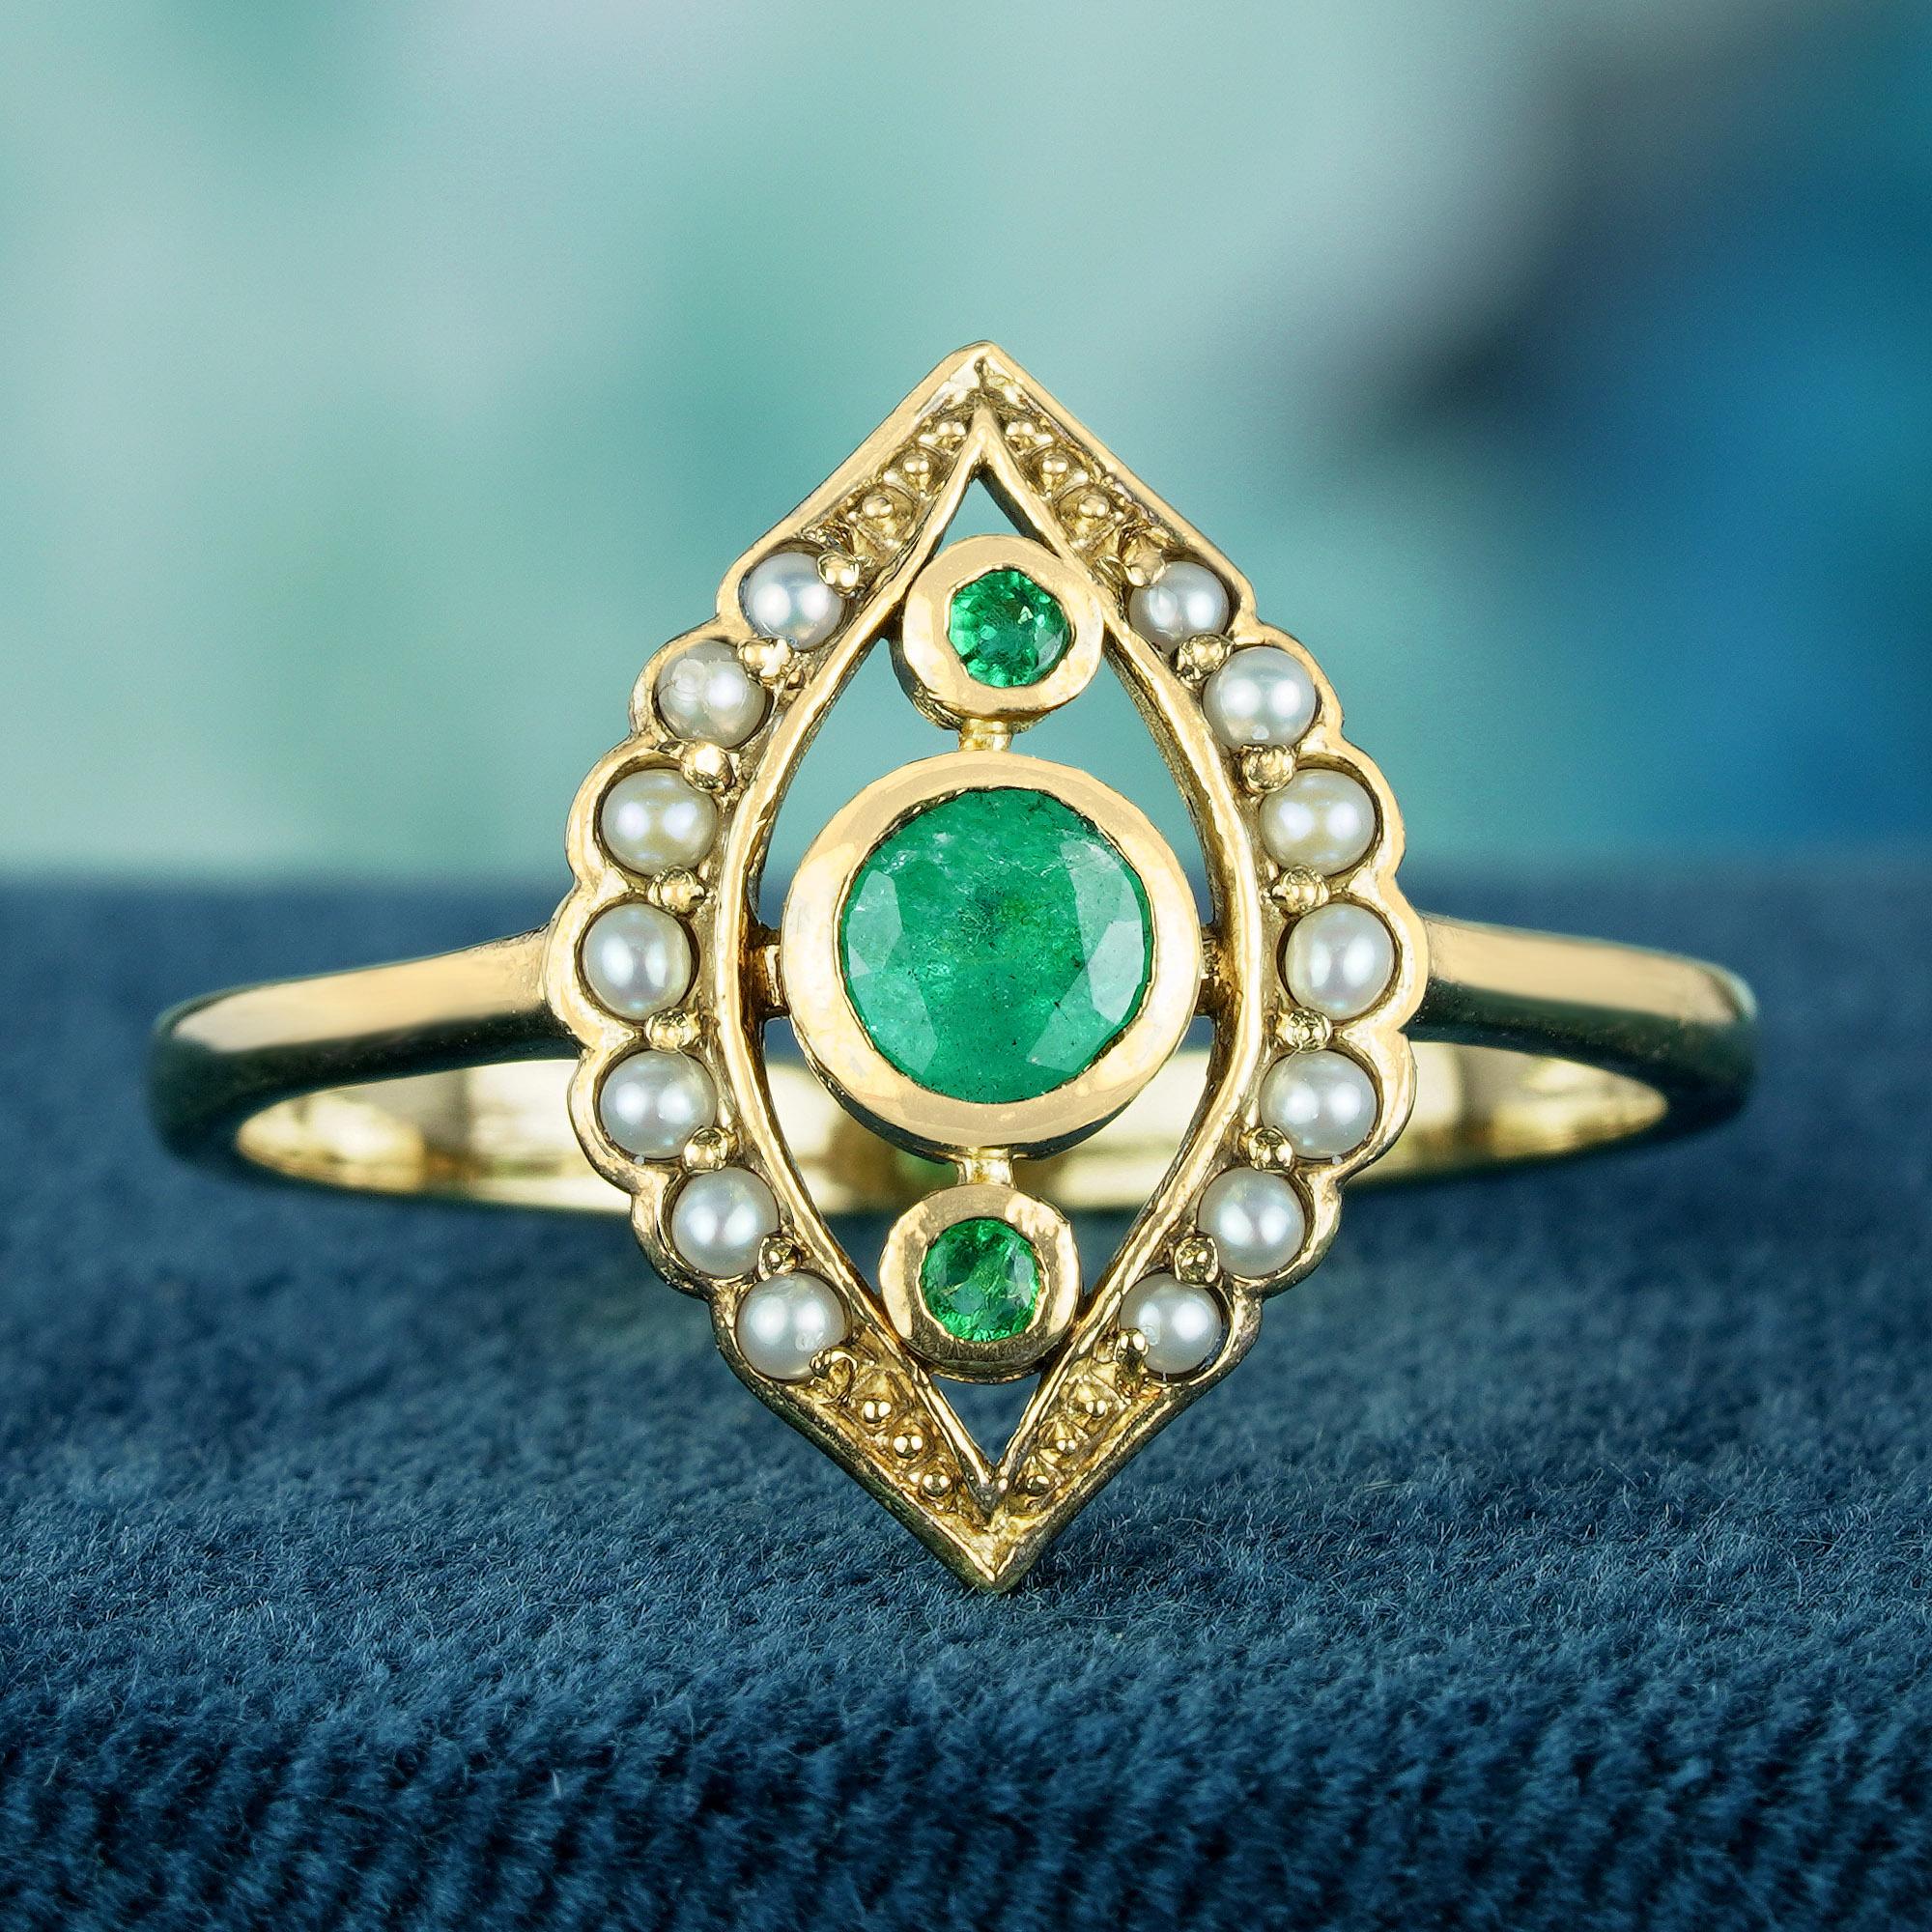 Crafted from radiant yellow gold, this ring showcases three cascading emeralds at its center, flanked by two smaller round emeralds. Surrounding the oval frame of the band are cascading round pearls on each side, adding a touch of elegance to the